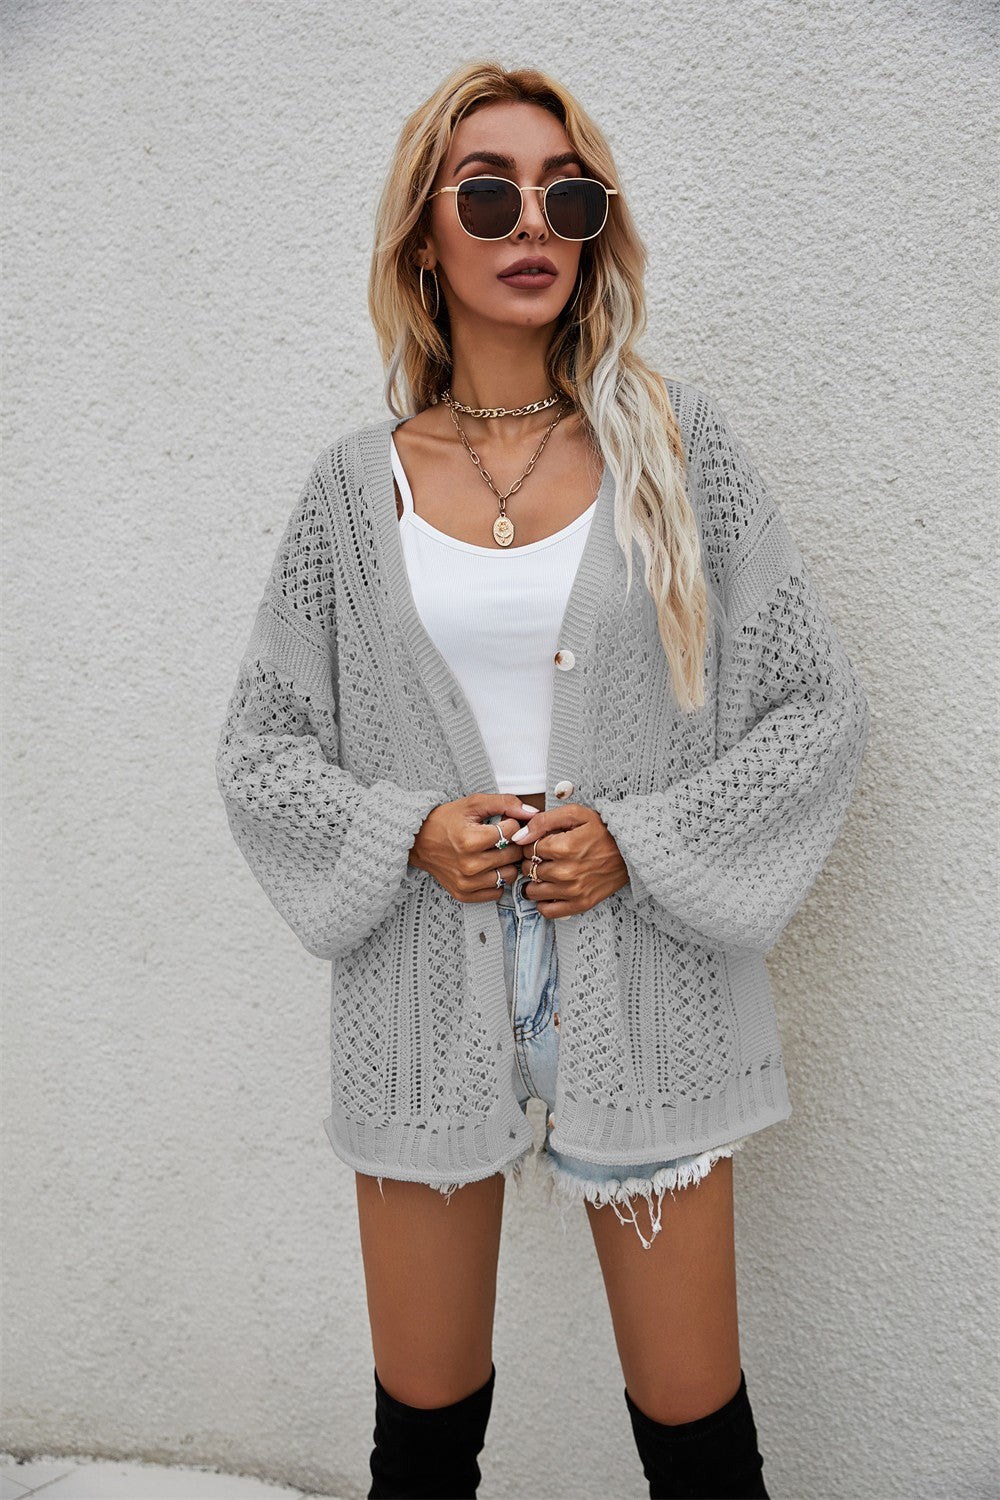 Openwork V-Neck Dropped Shoulder Cardigan - Gray / S - Women’s Clothing & Accessories - Shirts & Tops - 16 - 2024